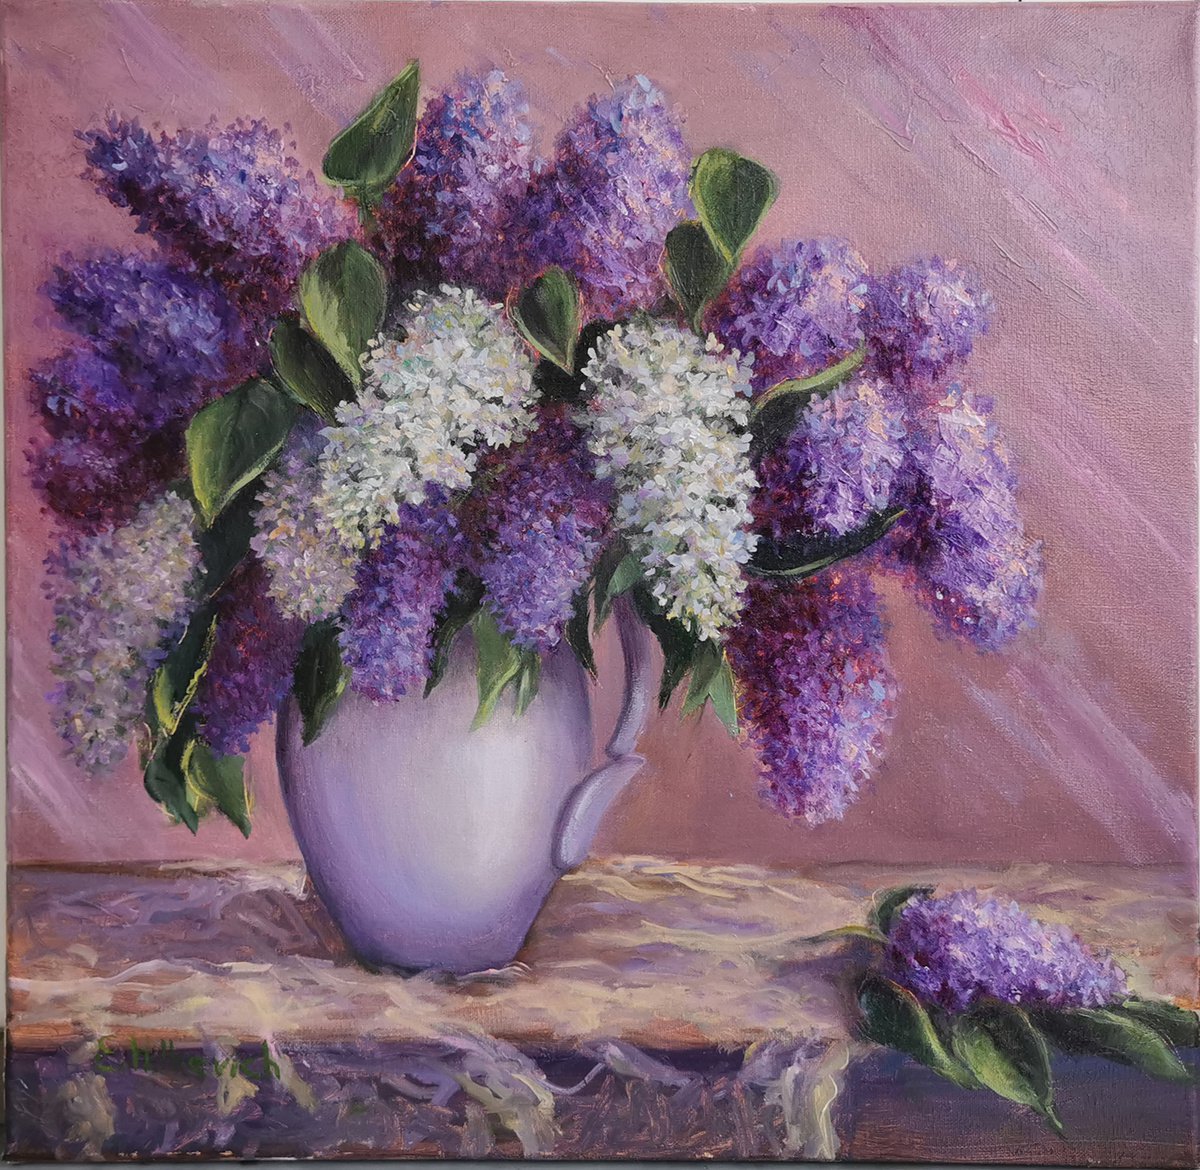 Lilac in Vase oil painting, size 50 x 50 cm by Elvira Hilkevich